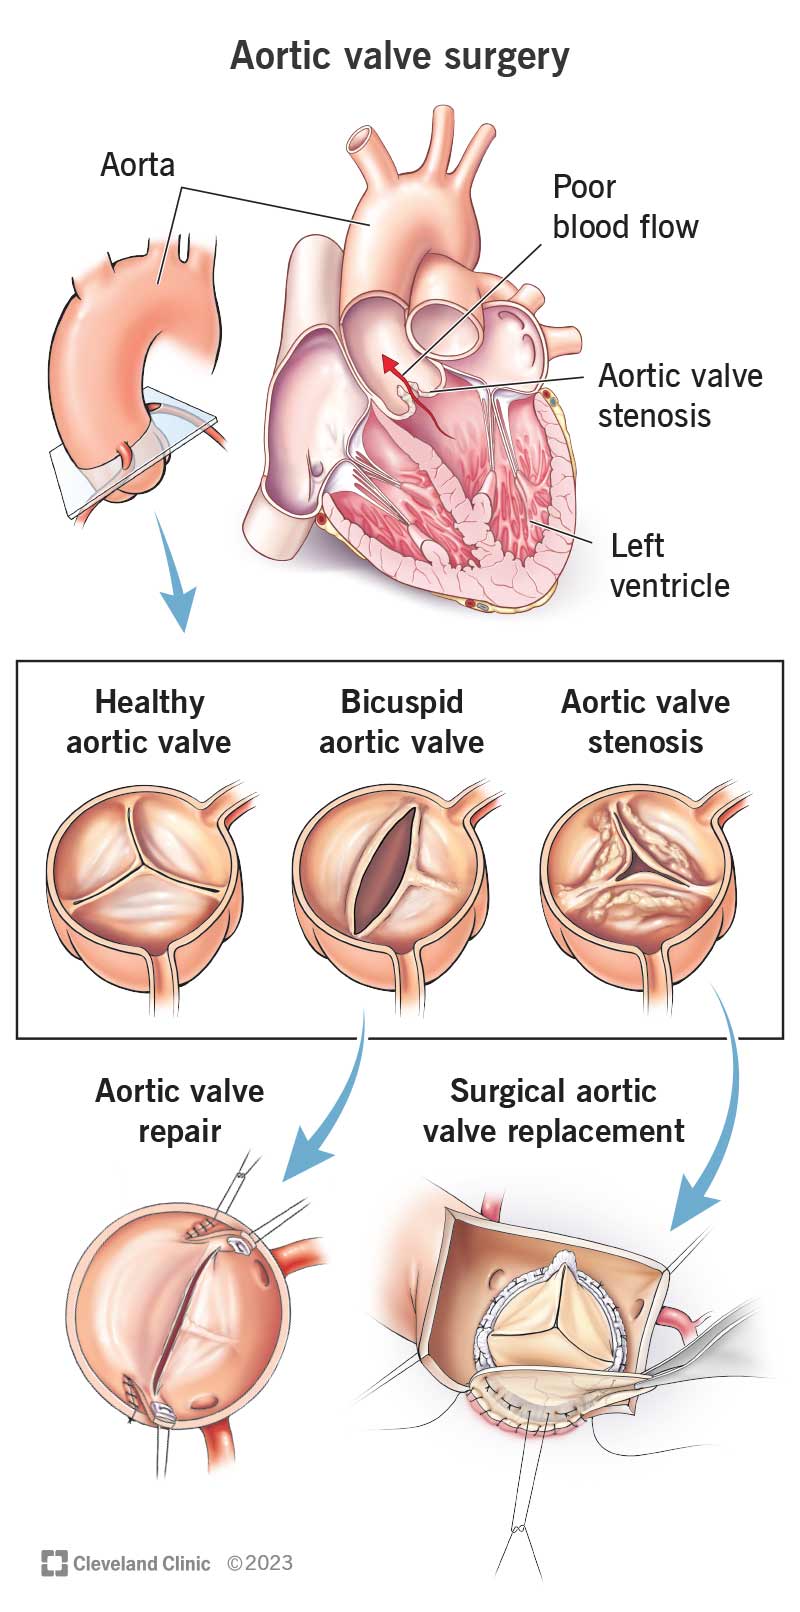 Aortic Valve Surgery Procedure Details And Benefits